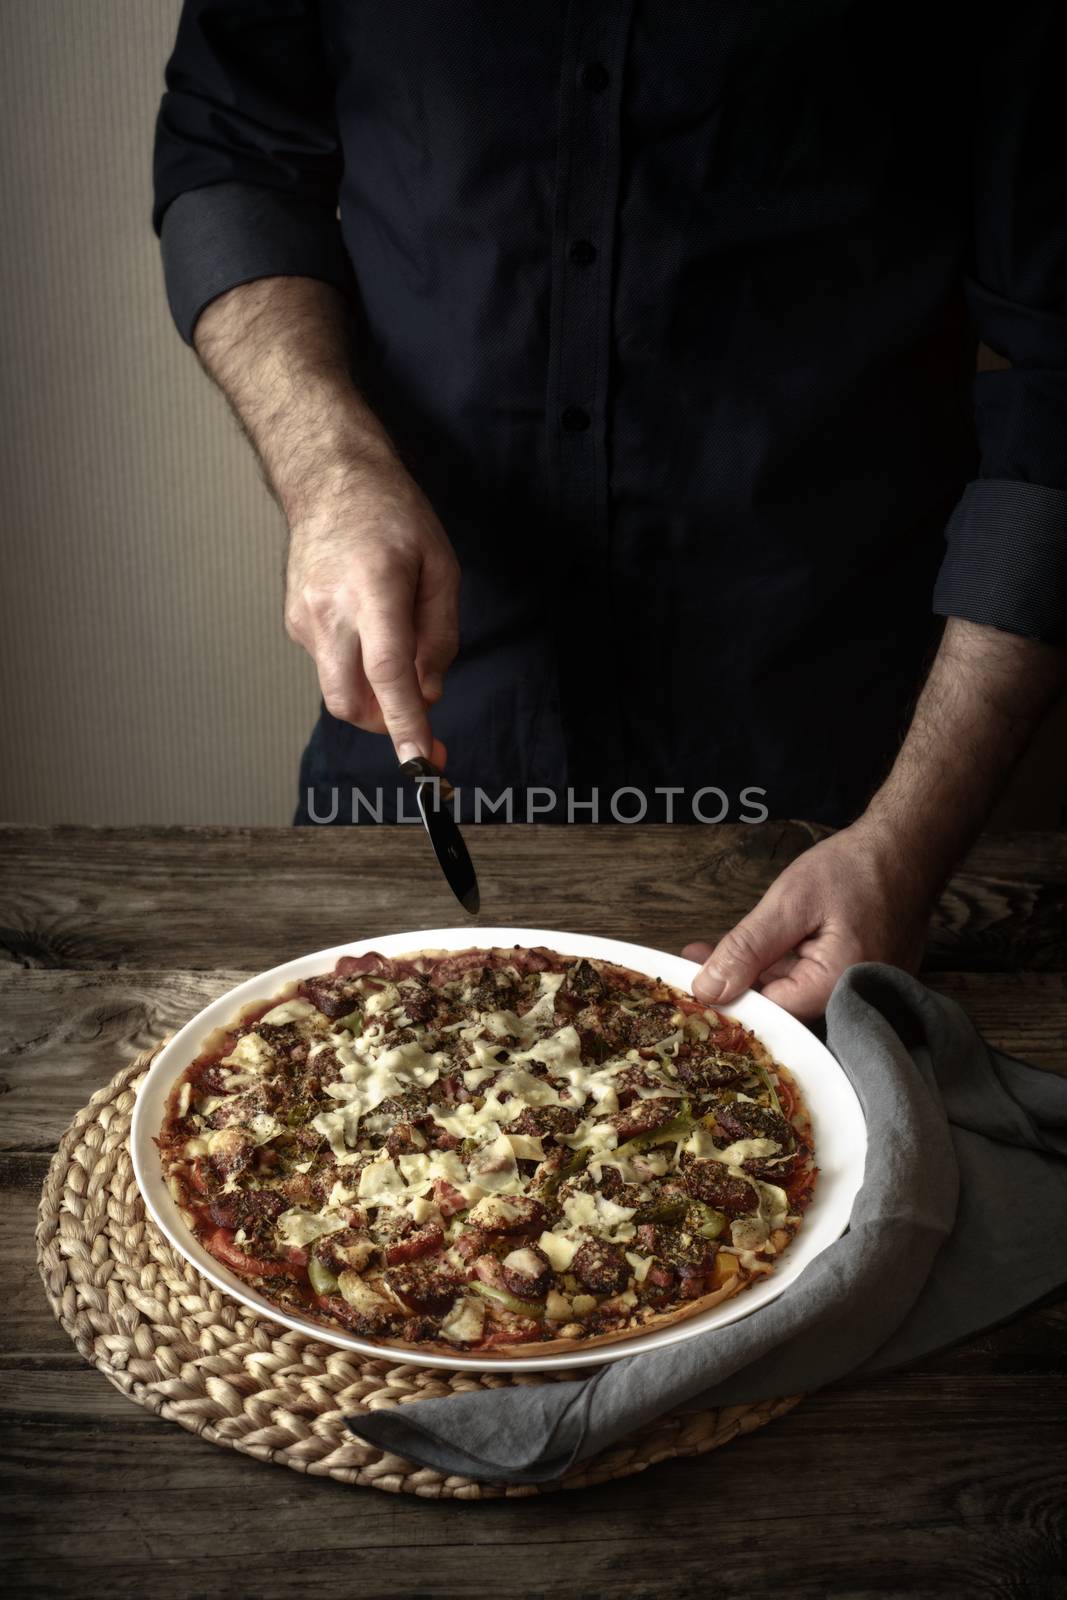 Man cuts the finished pizza on a white dish by Deniskarpenkov